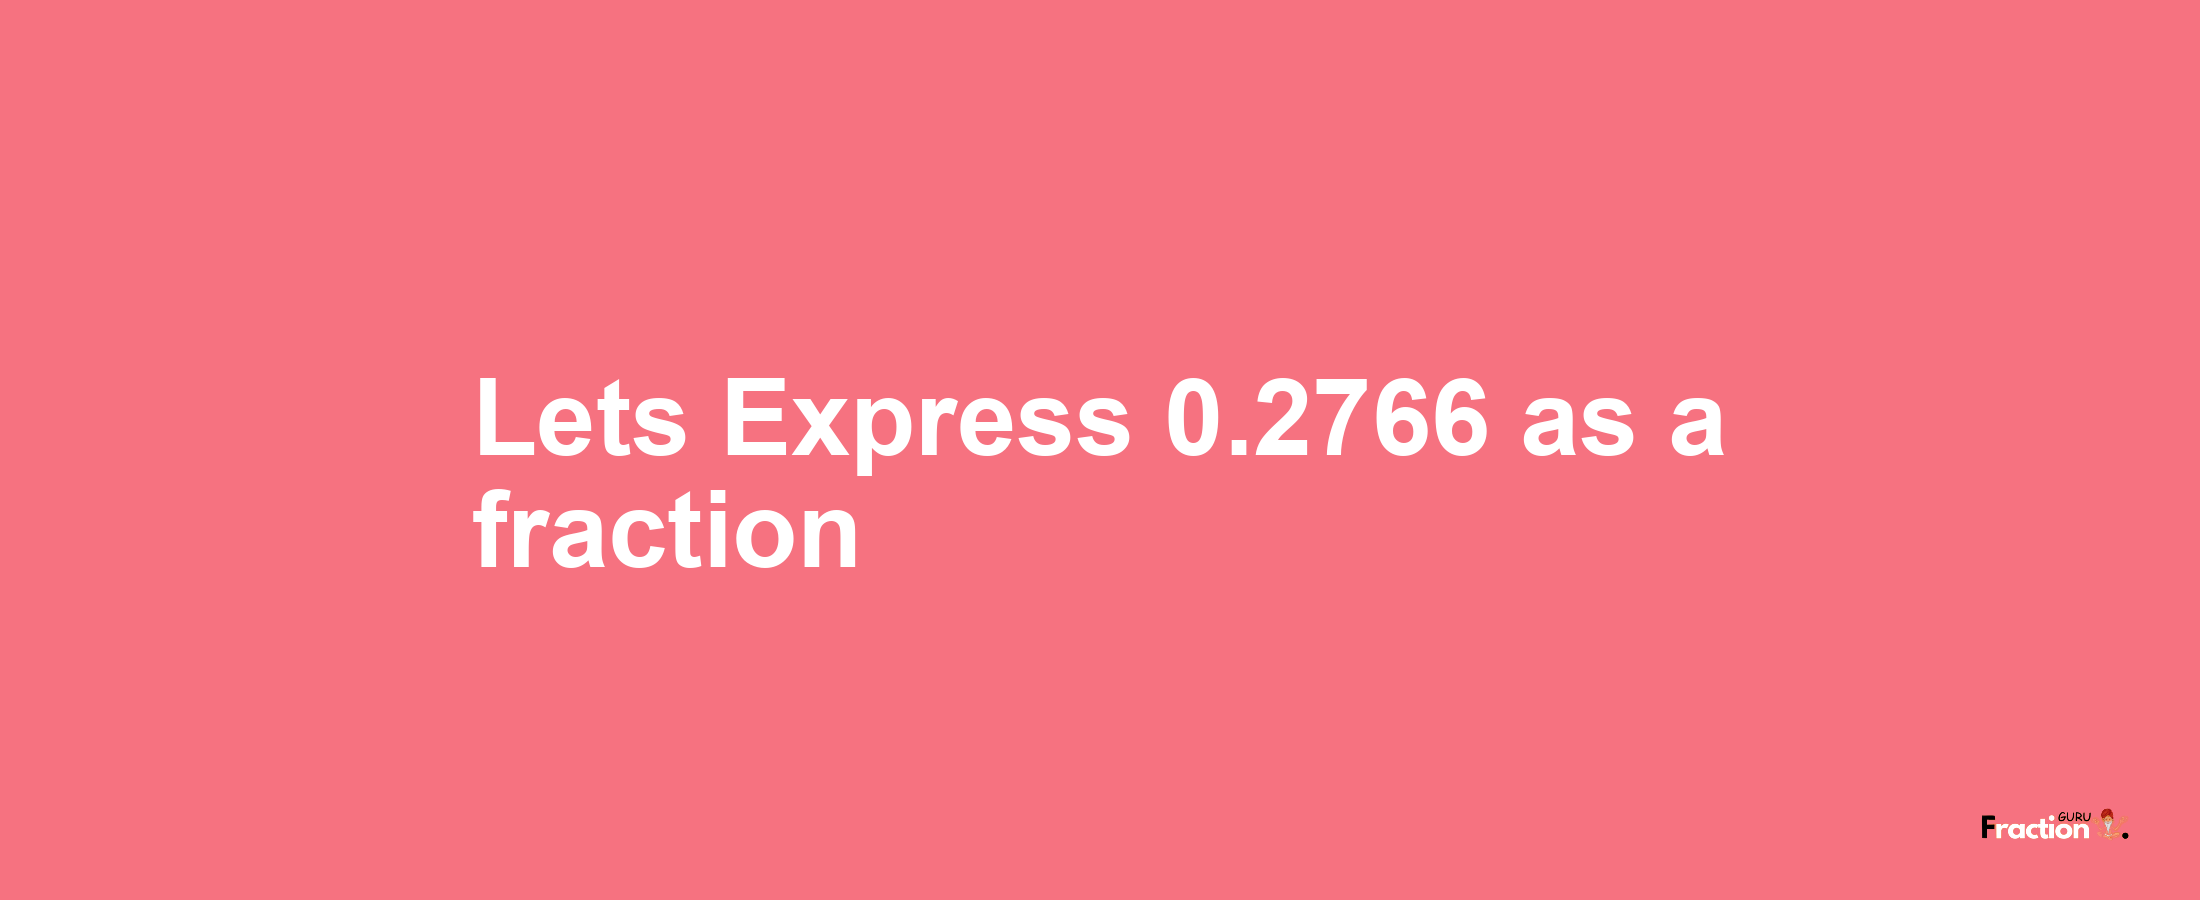 Lets Express 0.2766 as afraction